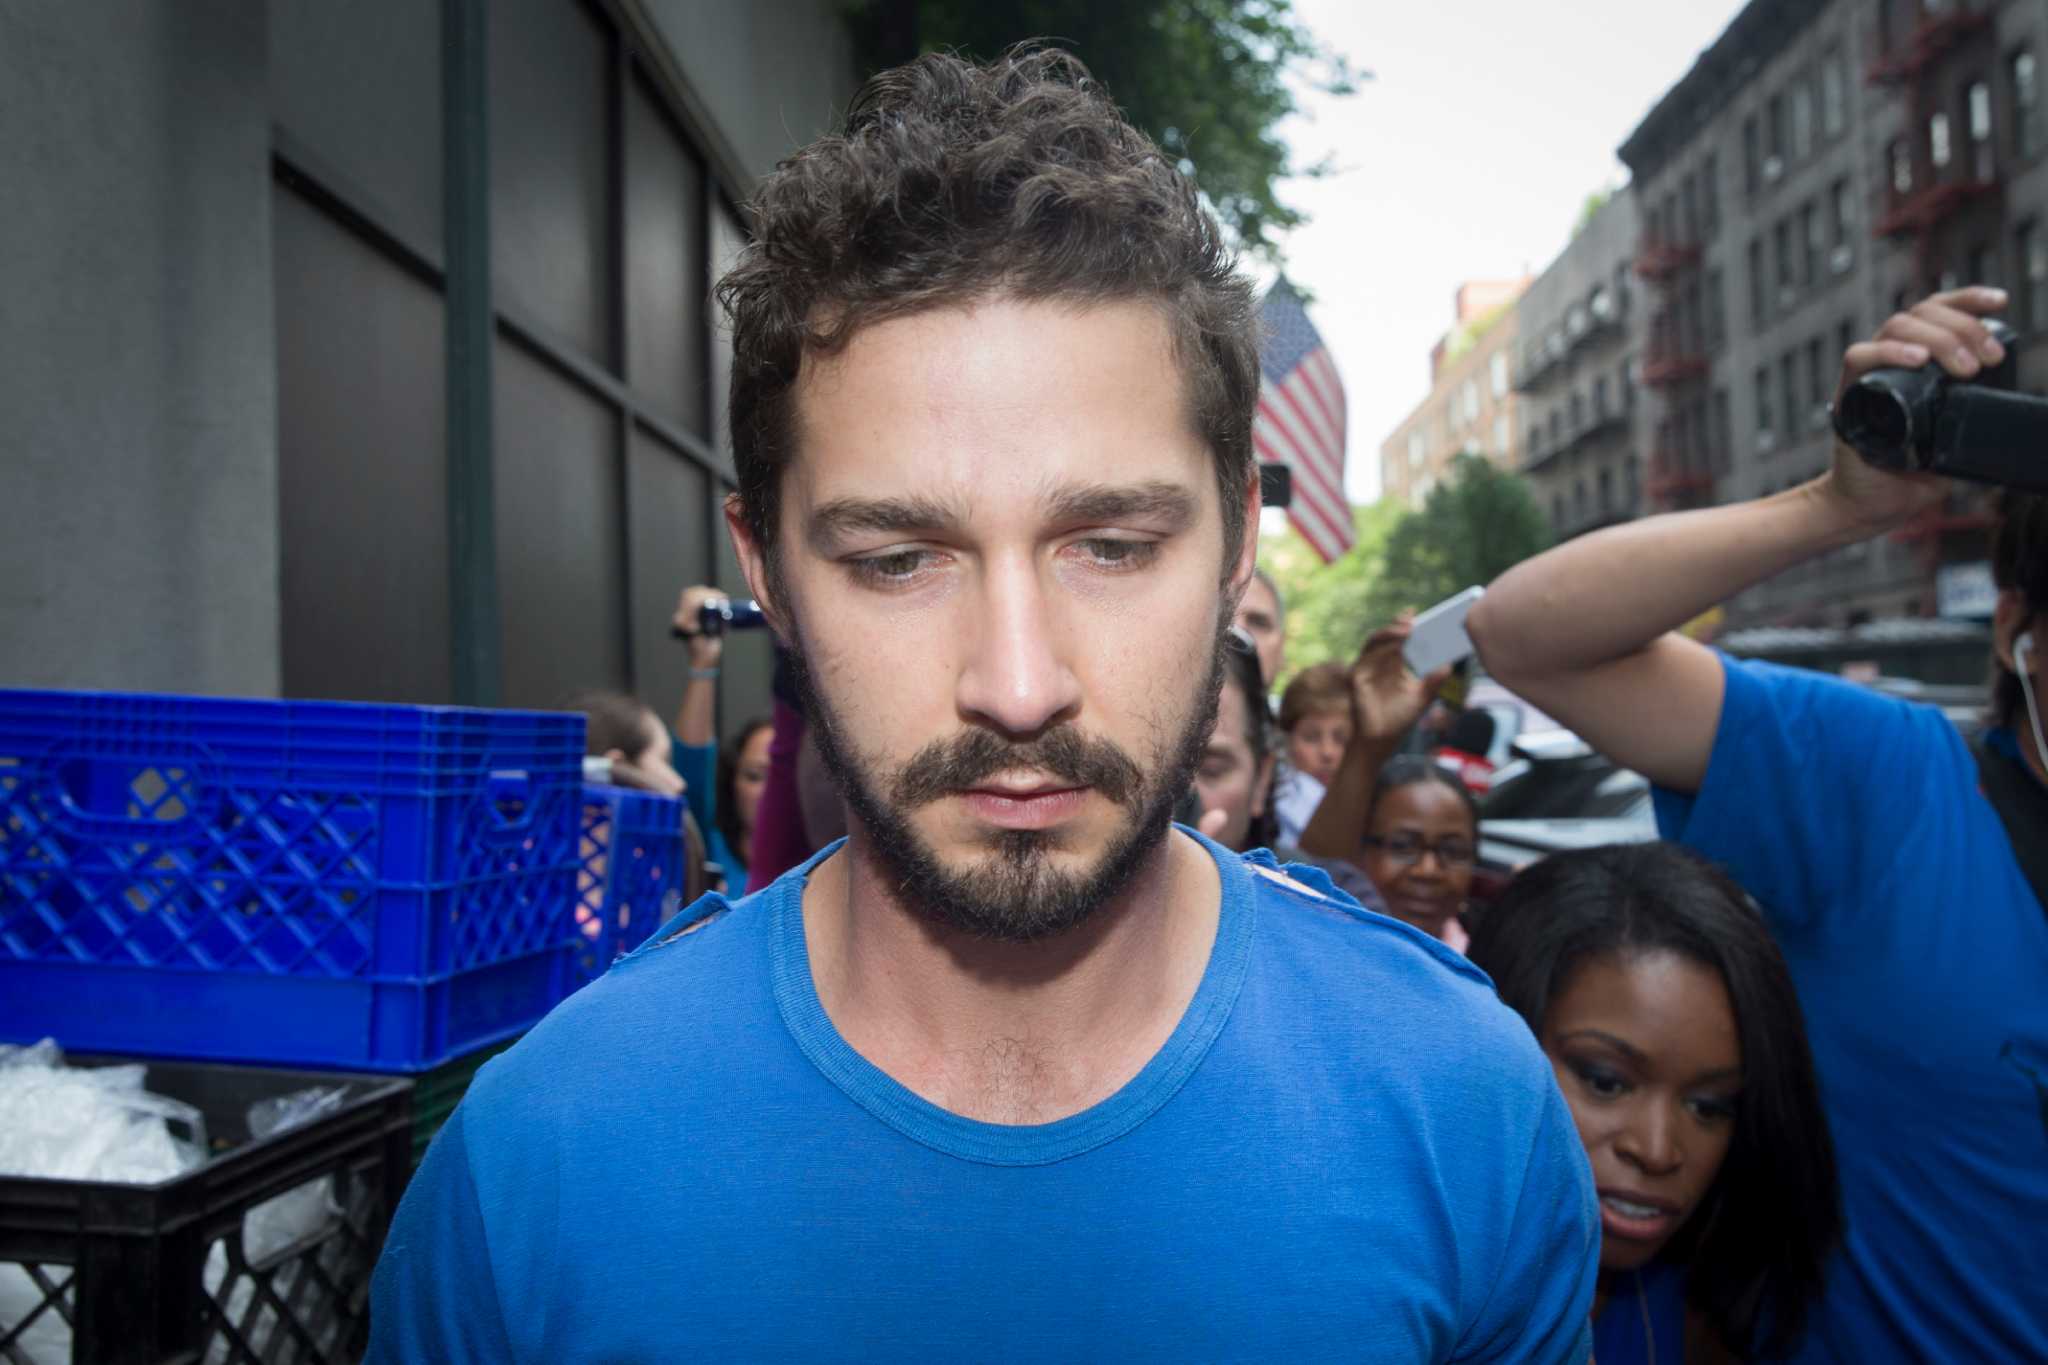 Shia LaBeouf, 'not famous' but still in headlines.